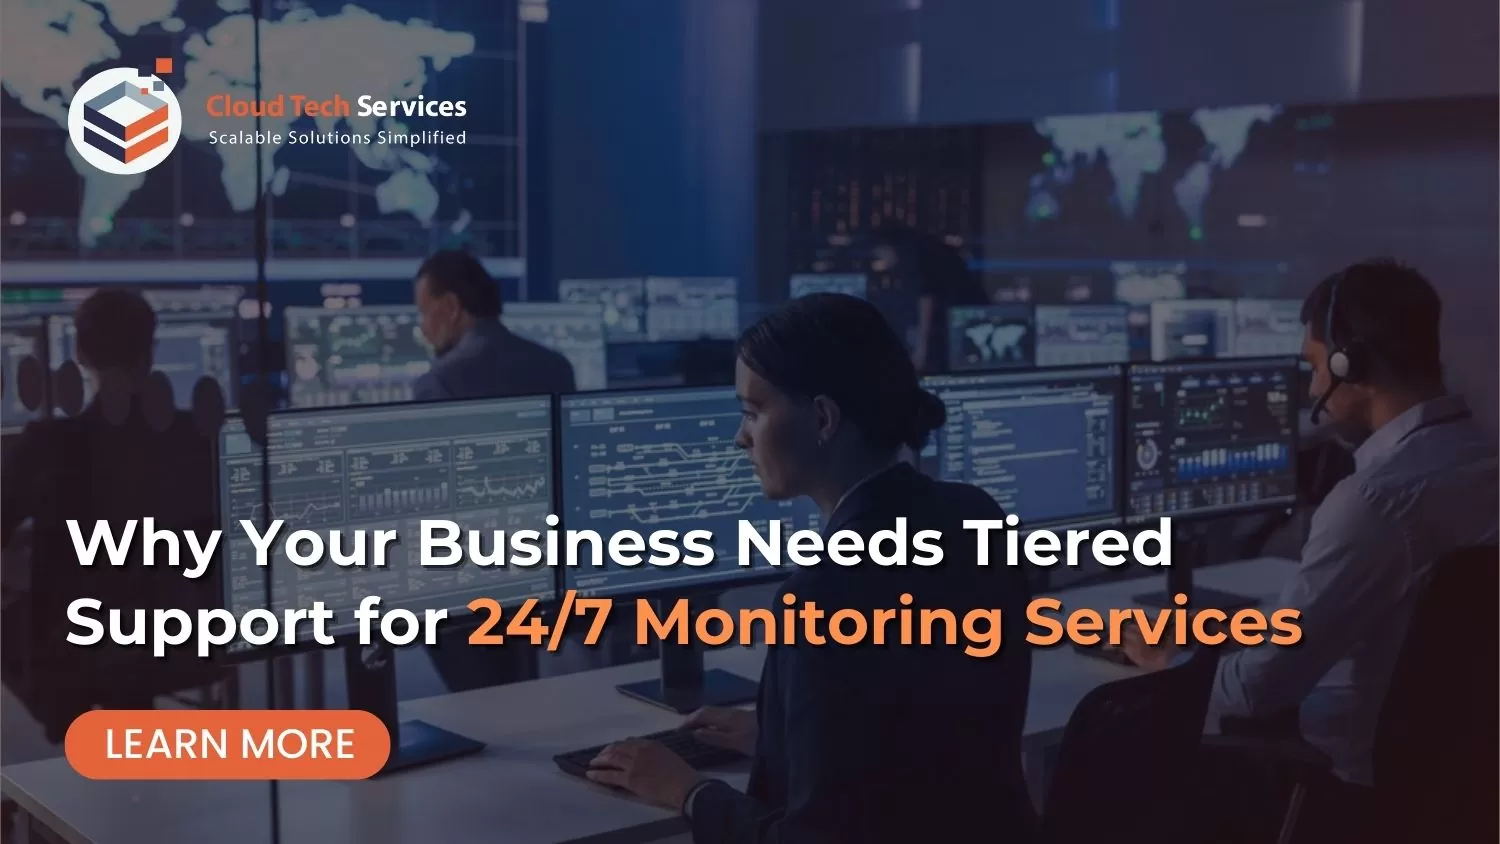 Why Your Business Needs Tiered Support for 24x7 Monitoring Services